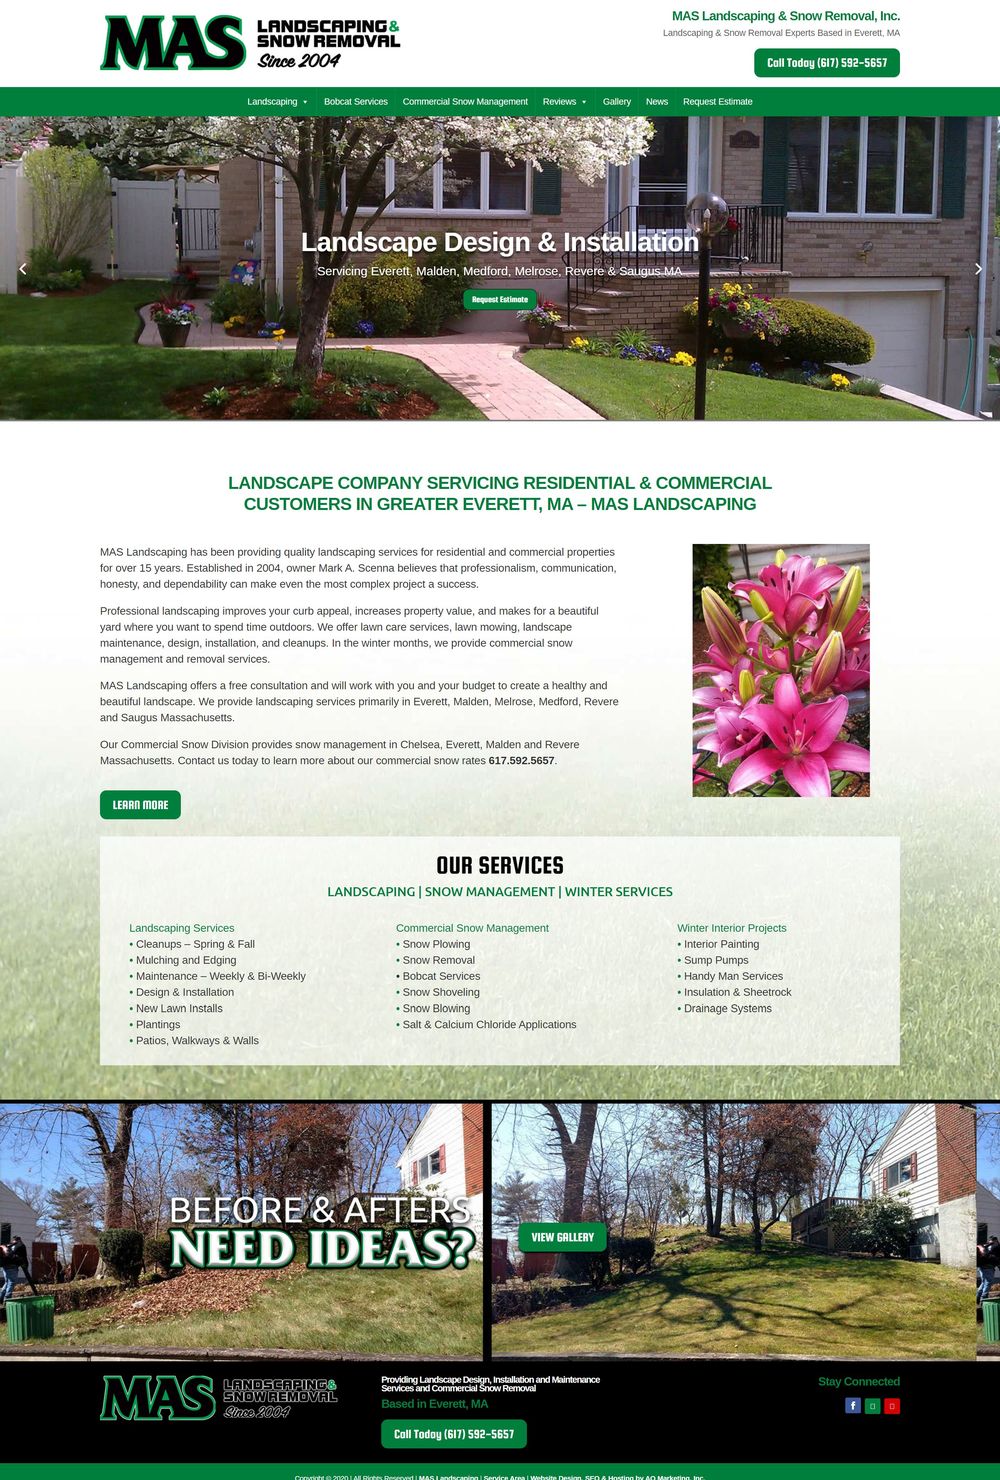 MAS Landscaping & Snow Removal, Inc.